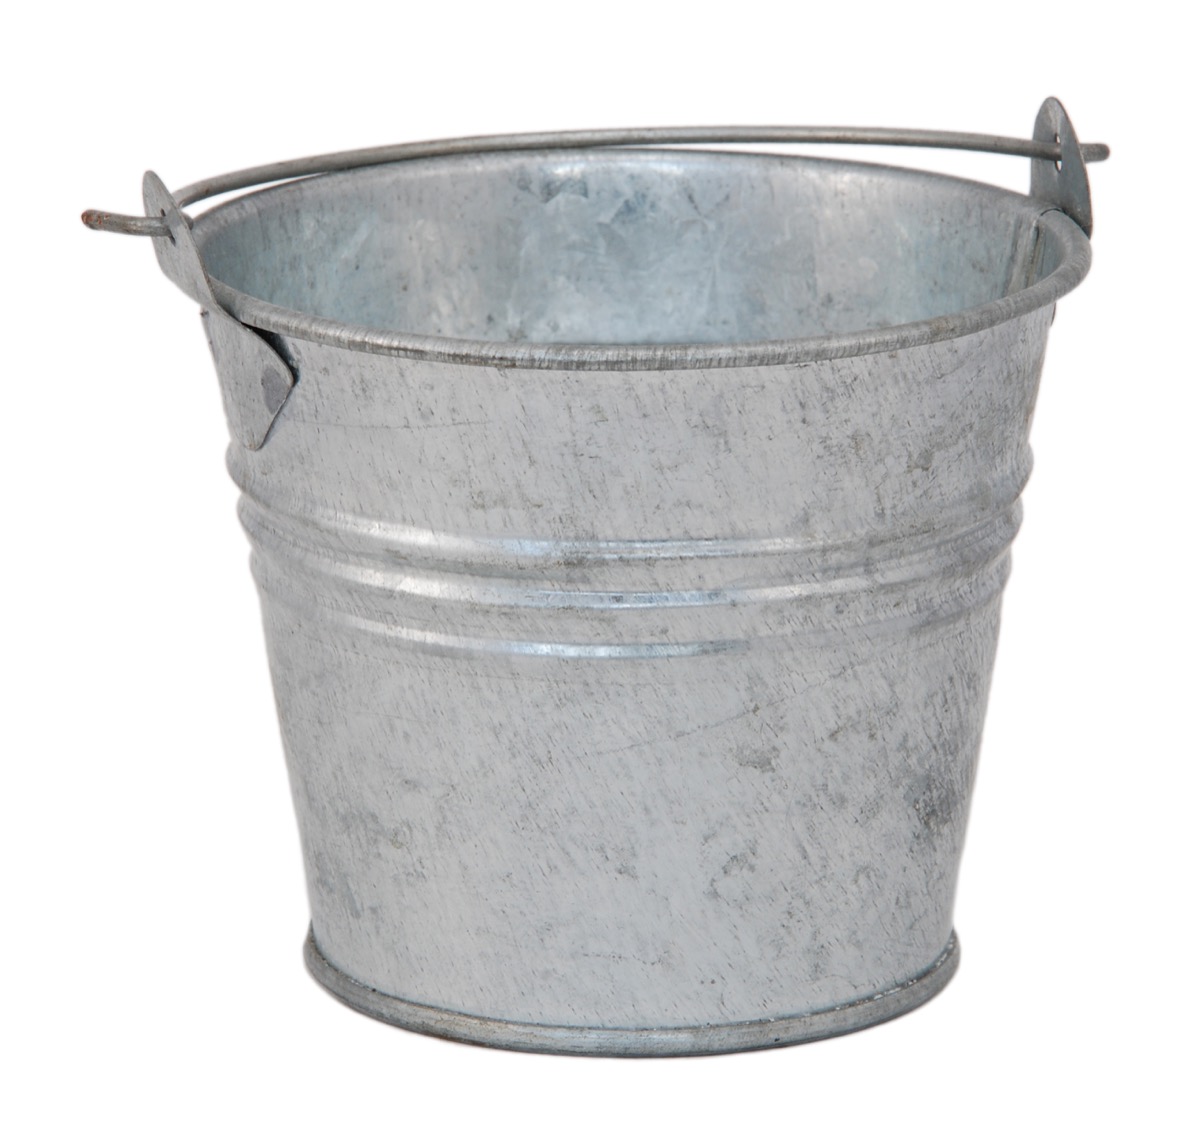 empty metal bucket with handle against white backdrop, war of the bucket crazy fact